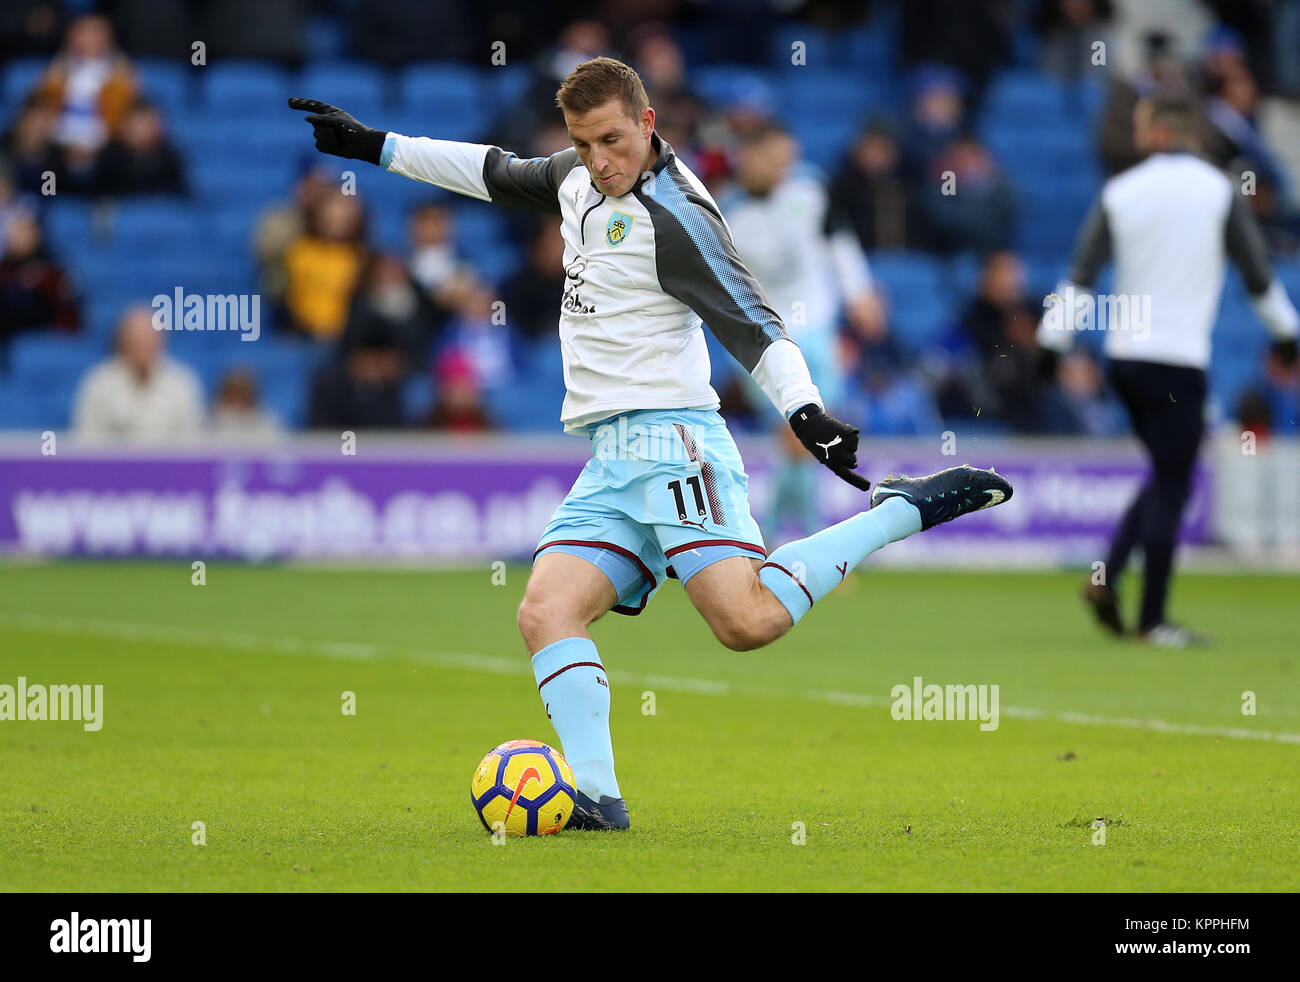 Burnley's Chris Wood warms up prior to the Premier League match at the AMEX Stadium, Brighton. PRESS ASSOCIATION Photo. Picture date: Saturday December 16, 2017. See PA story SOCCER Brighton. Photo credit should read: Gareth Fuller/PA Wire. RESTRICTIONS: No use with unauthorised audio, video, data, fixture lists, club/league logos or 'live' services. Online in-match use limited to 75 images, no video emulation. No use in betting, games or single club/league/player publications. Stock Photo